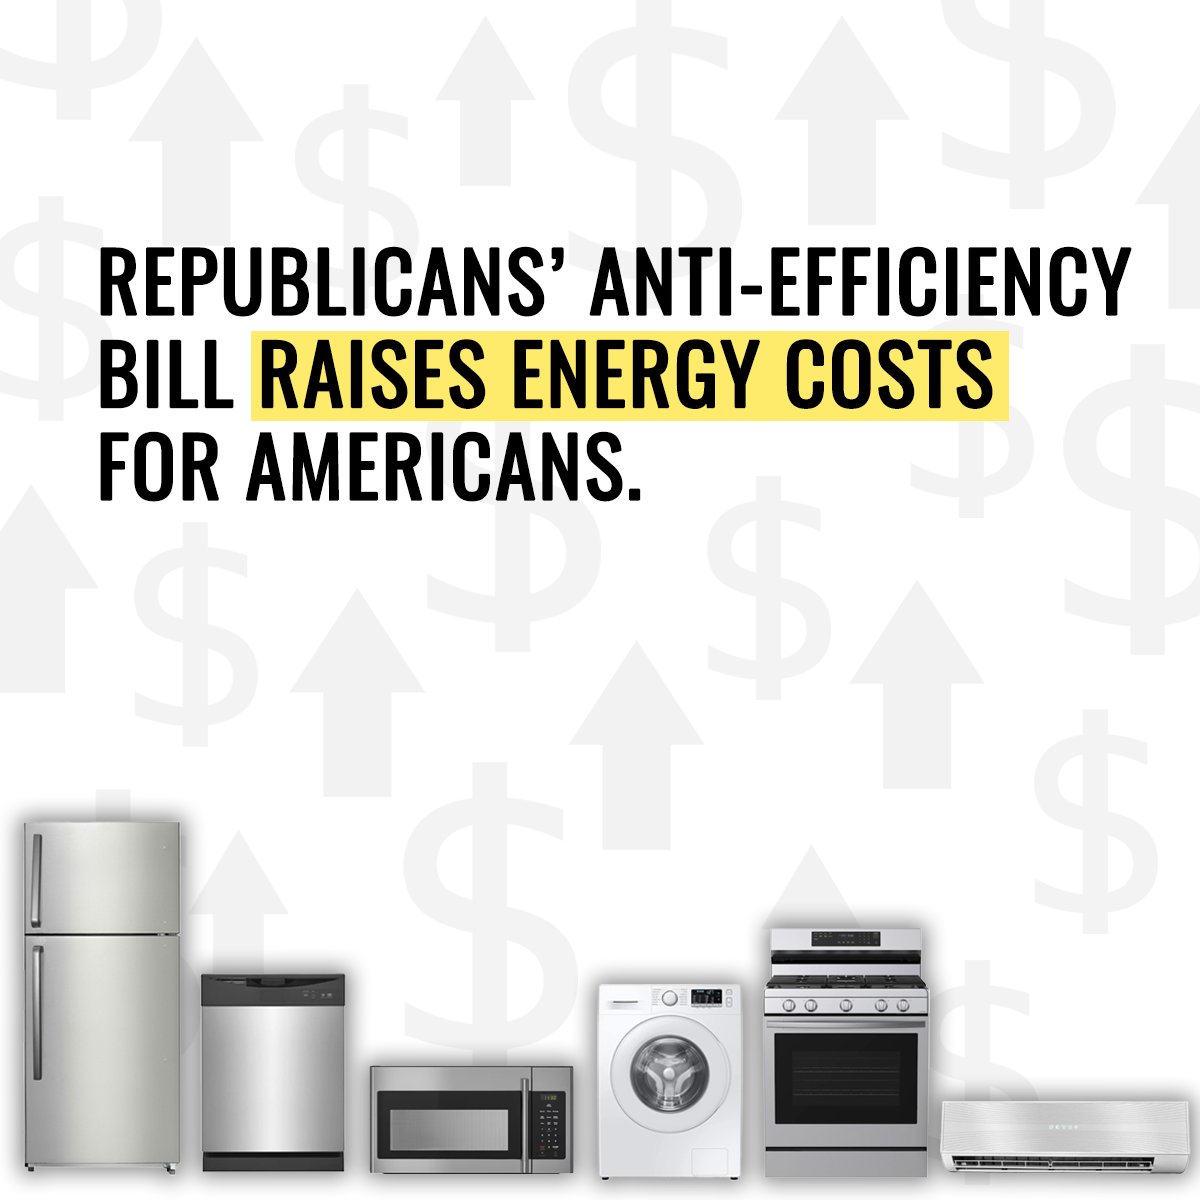 Republicans’ polluters over people agenda continues today. They want to gut popular energy efficiency standards that save Americans money. Once again, Republicans are only interested in protecting their polluter friends.